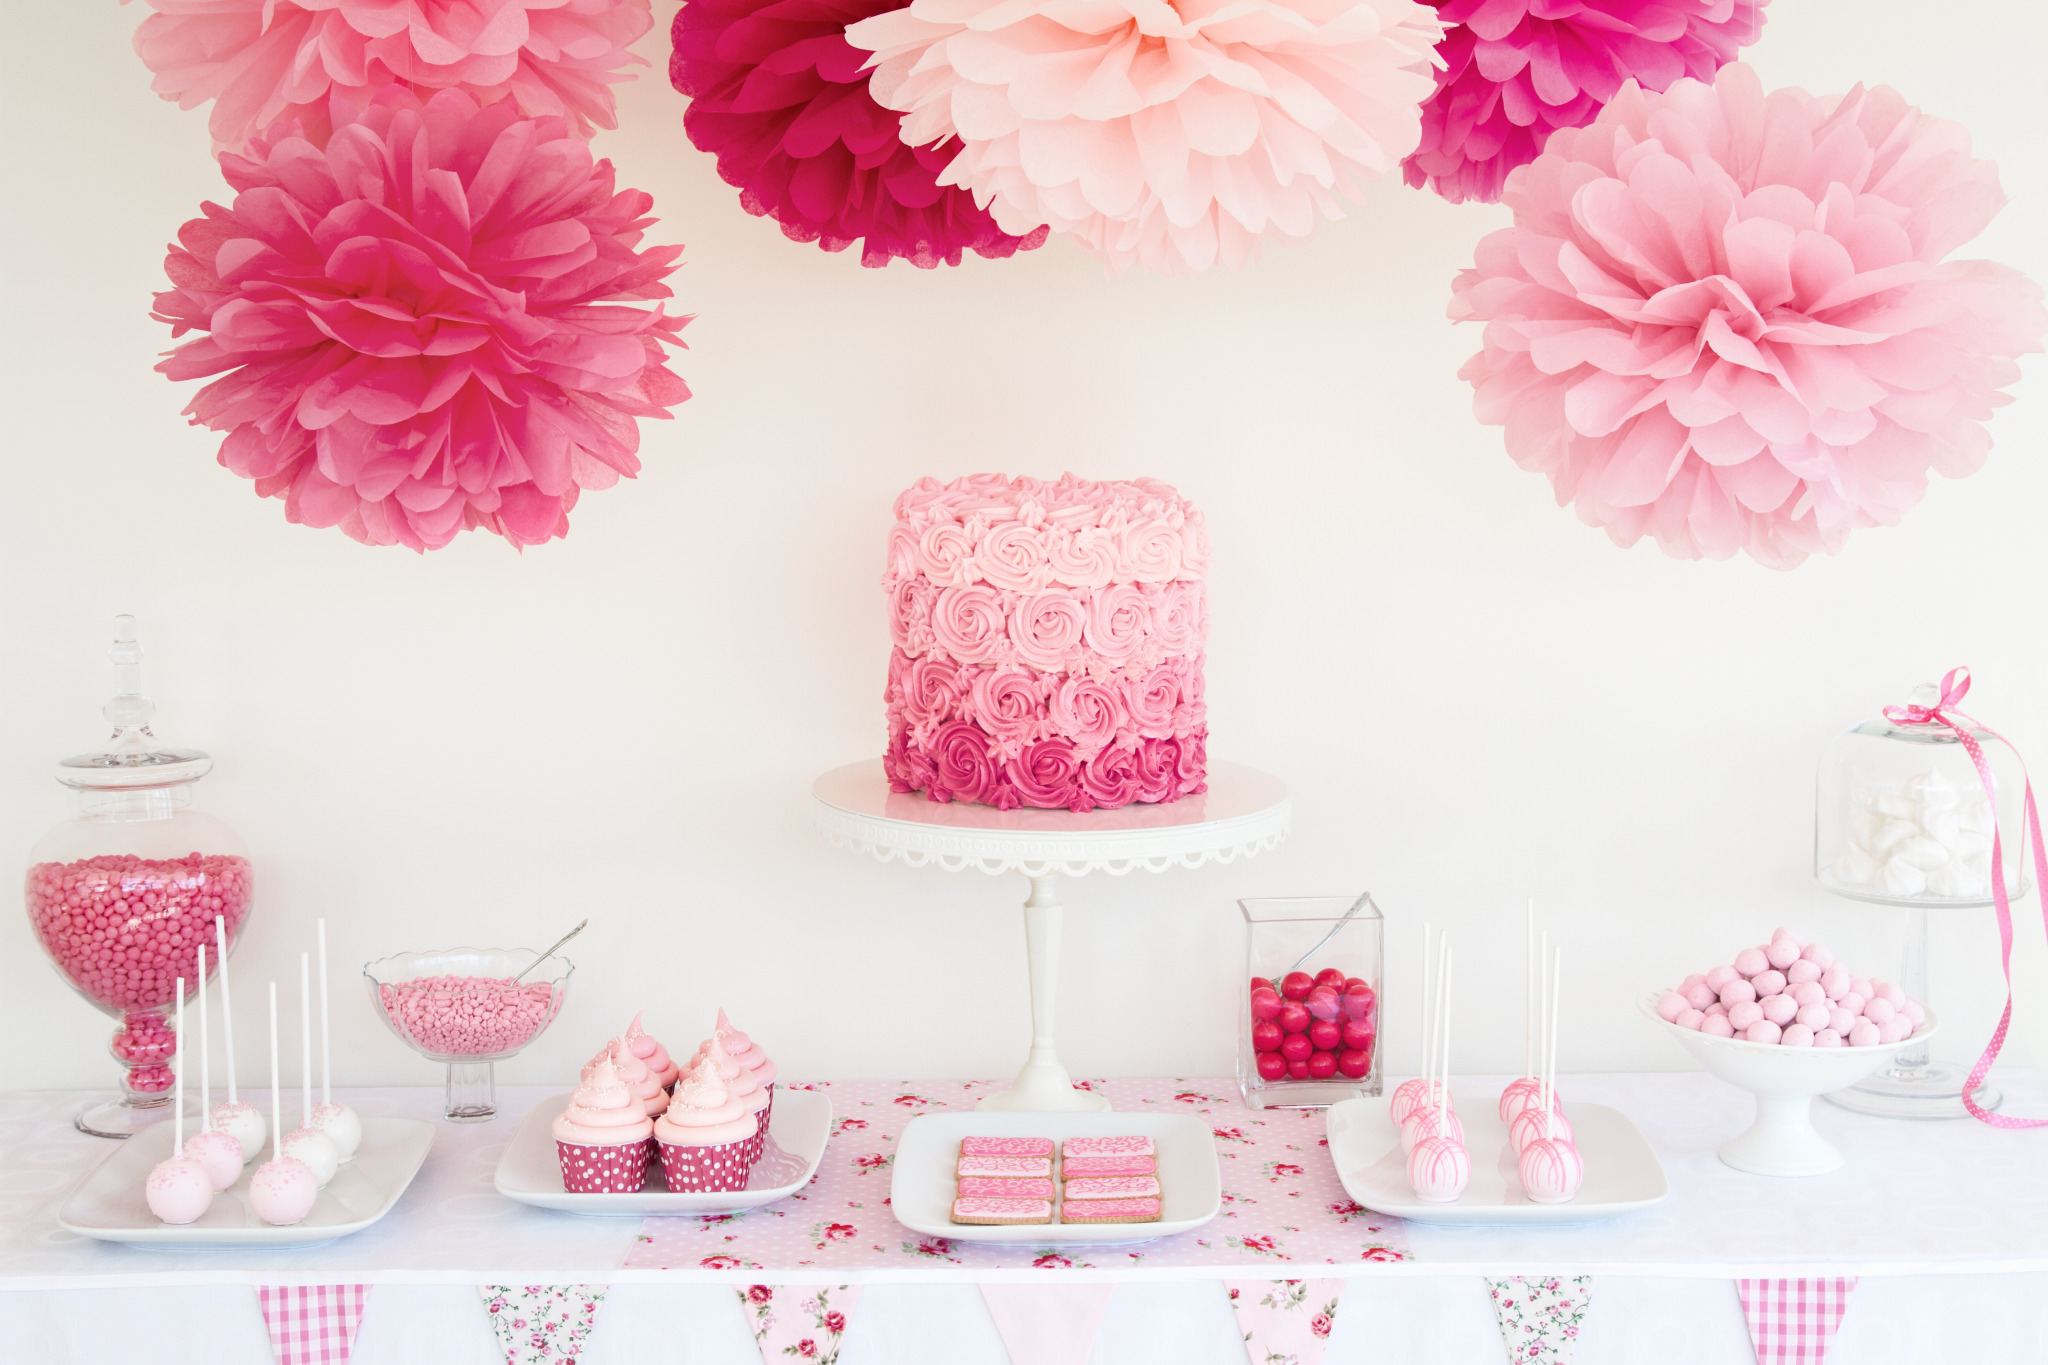 Best pink desserts for your pink dessert table